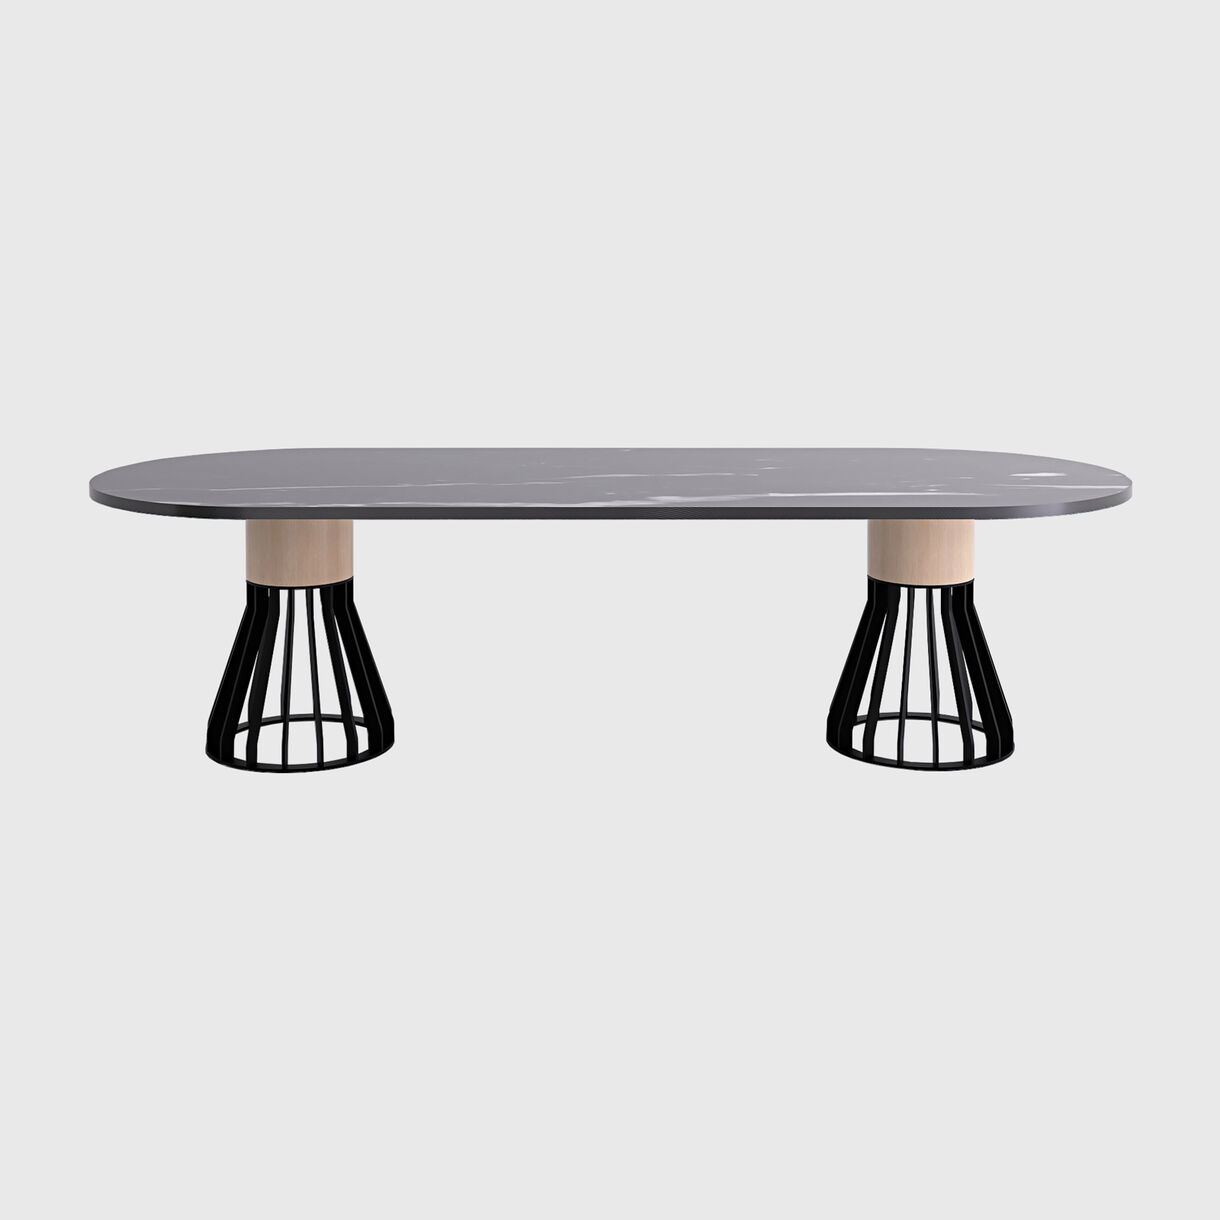 Mewoma Dining Table, Black Marble